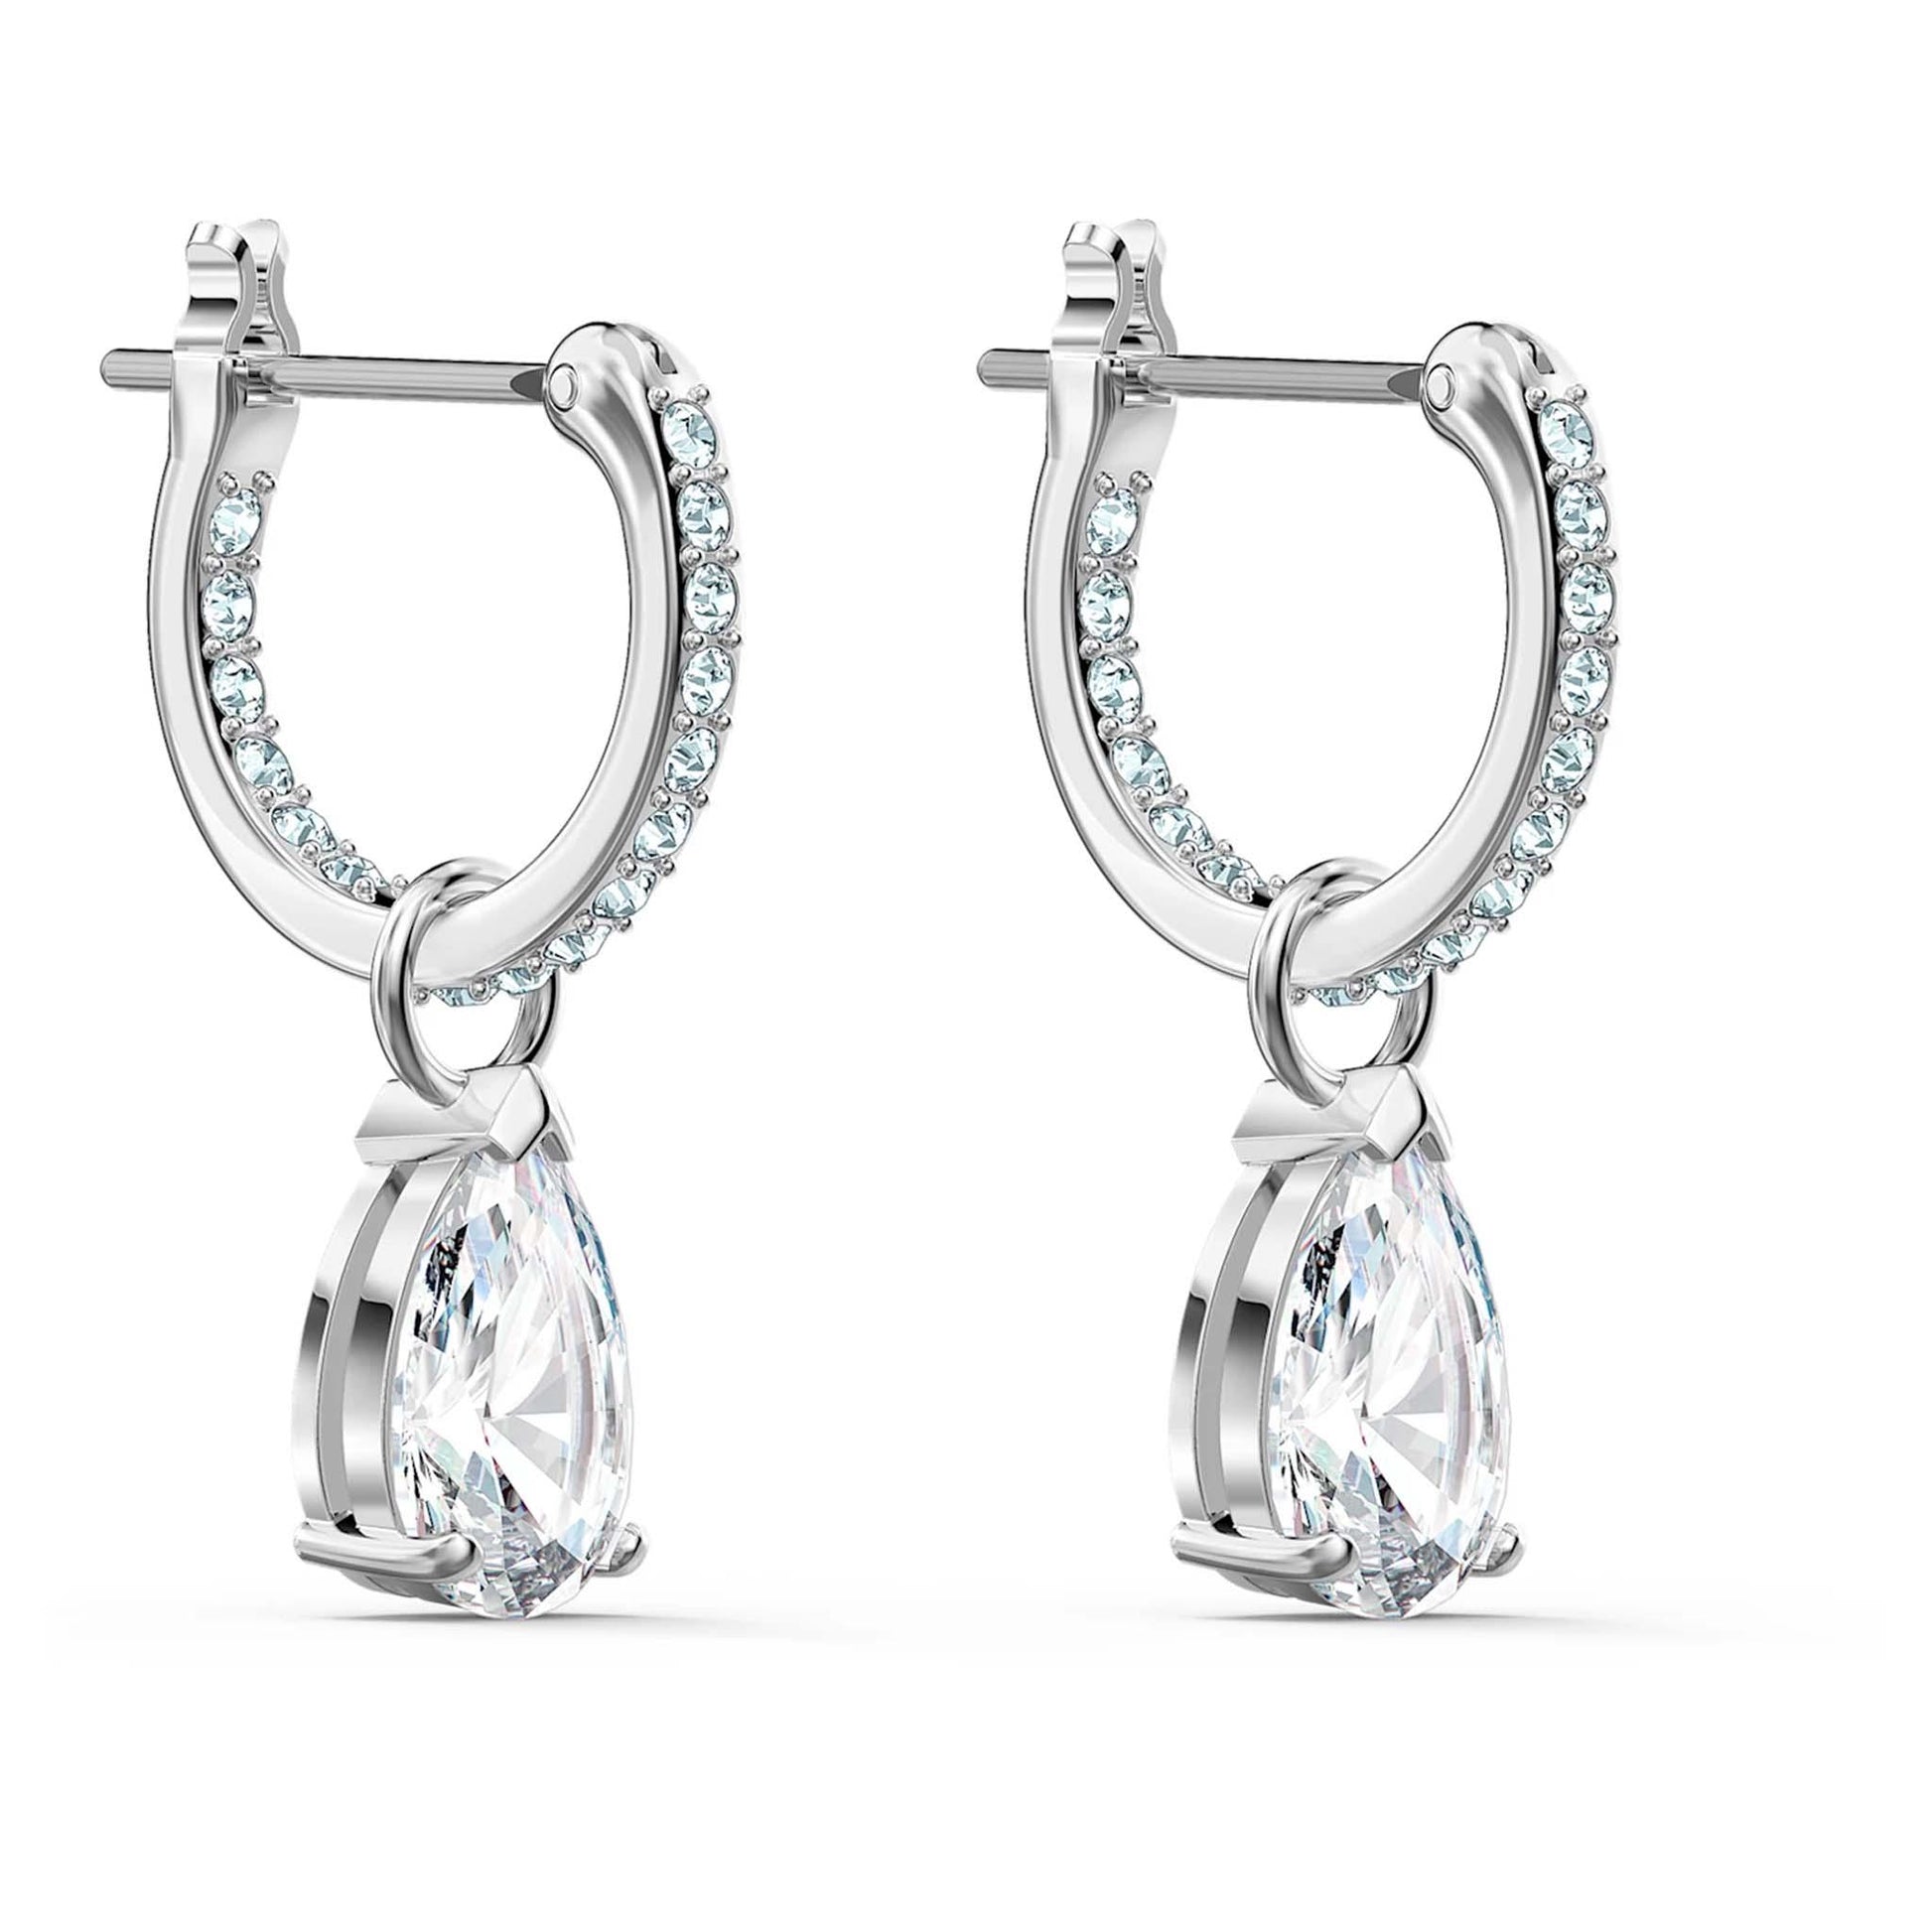 Attract hoop earrings - Cosmos Boutique New Jersey